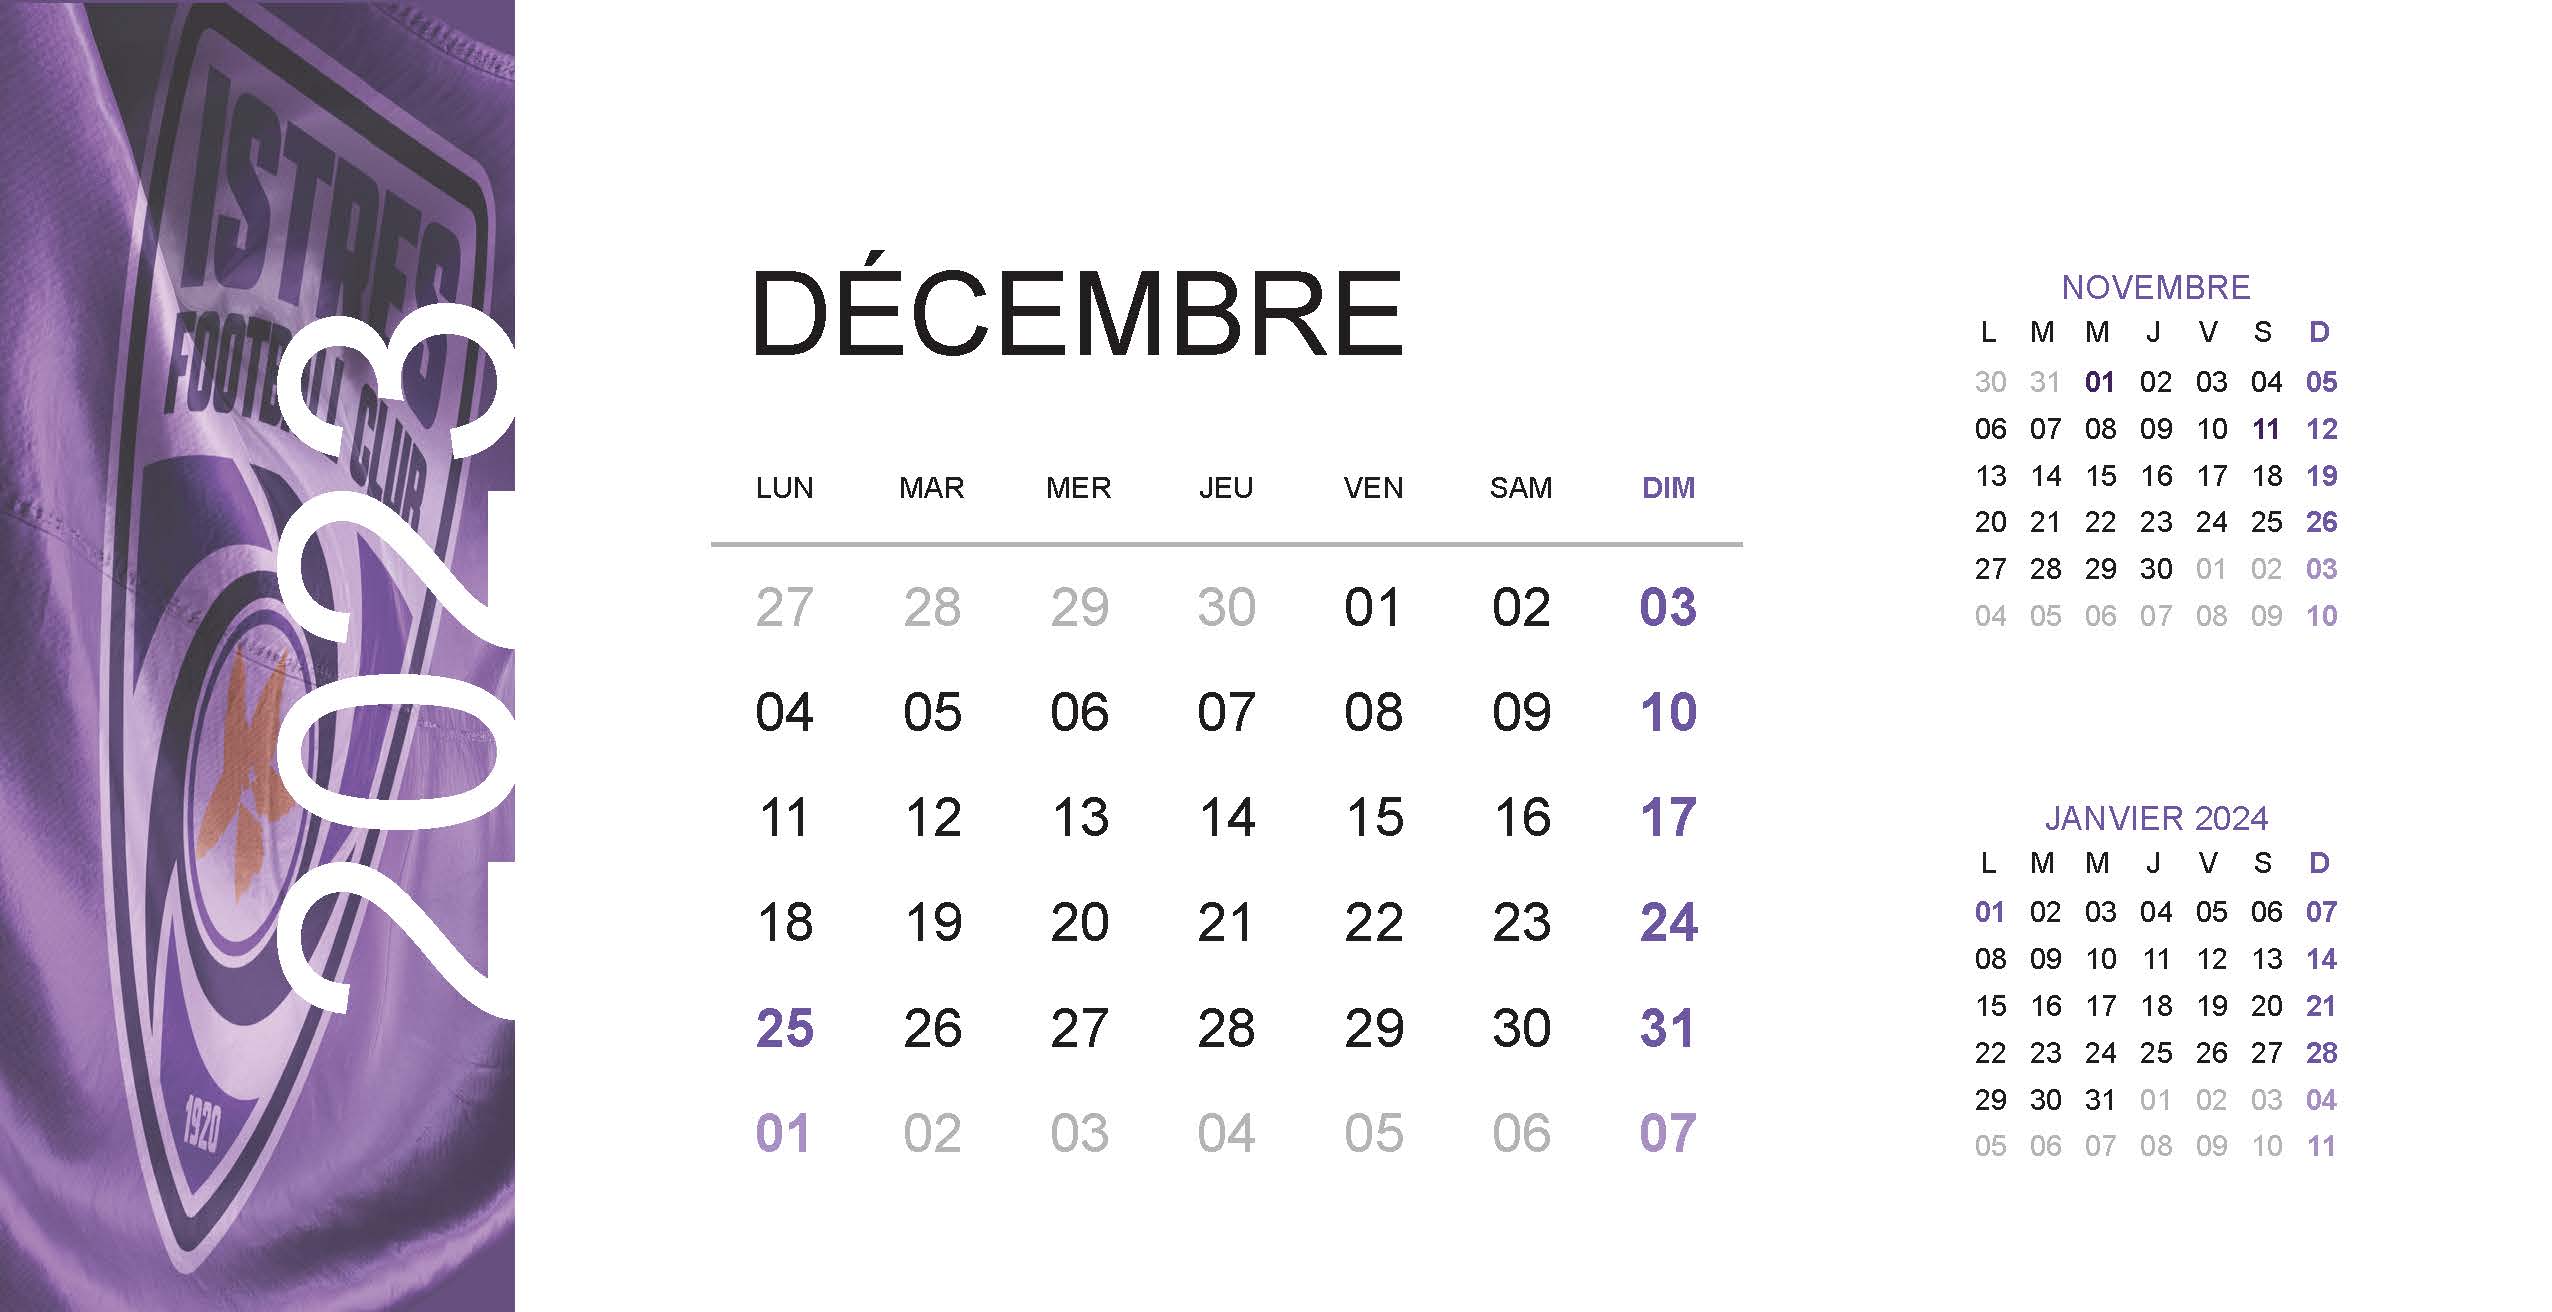 Istres FC - Calendrier 2023_Page_25